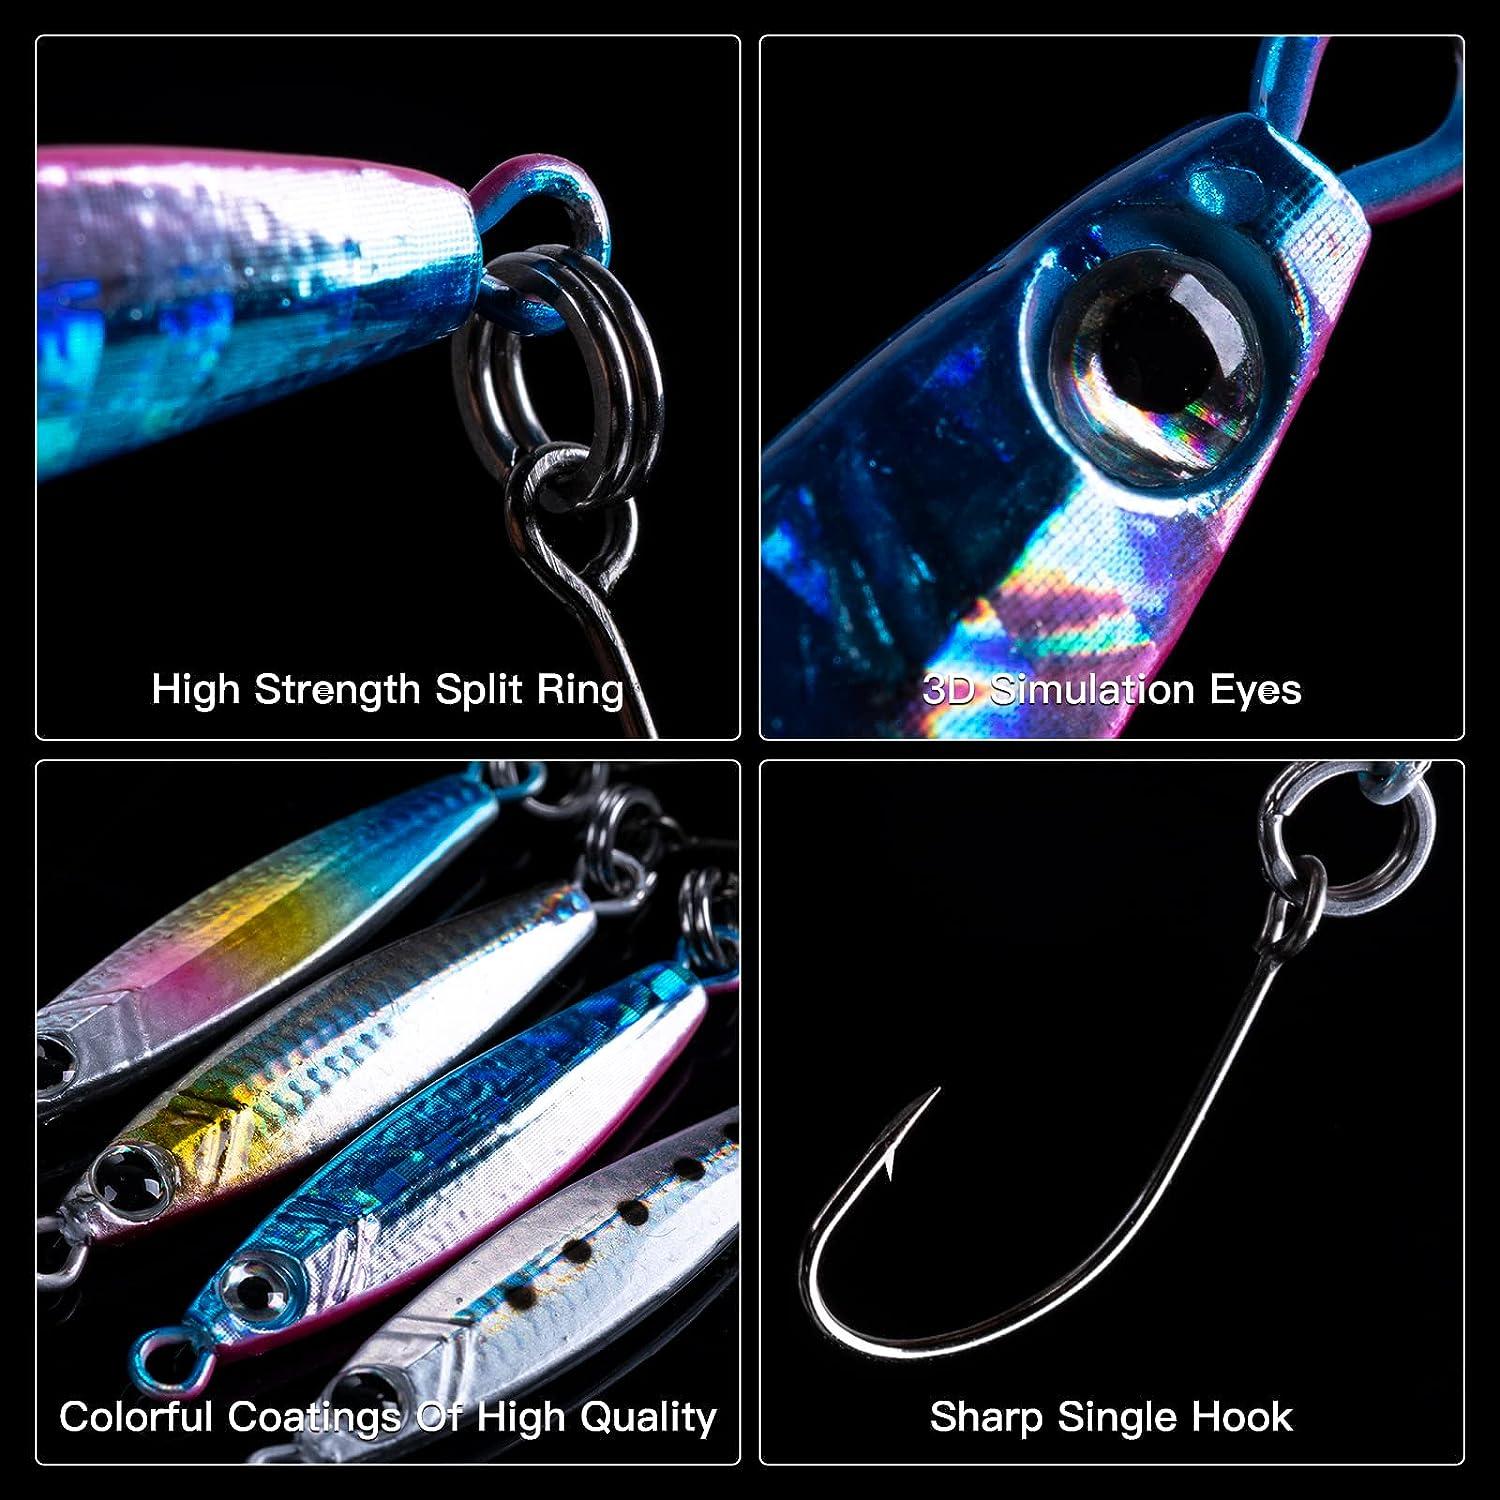 12Pcs Winter Ice Fishing Lure ice jigs for Crappie Bass Panfish